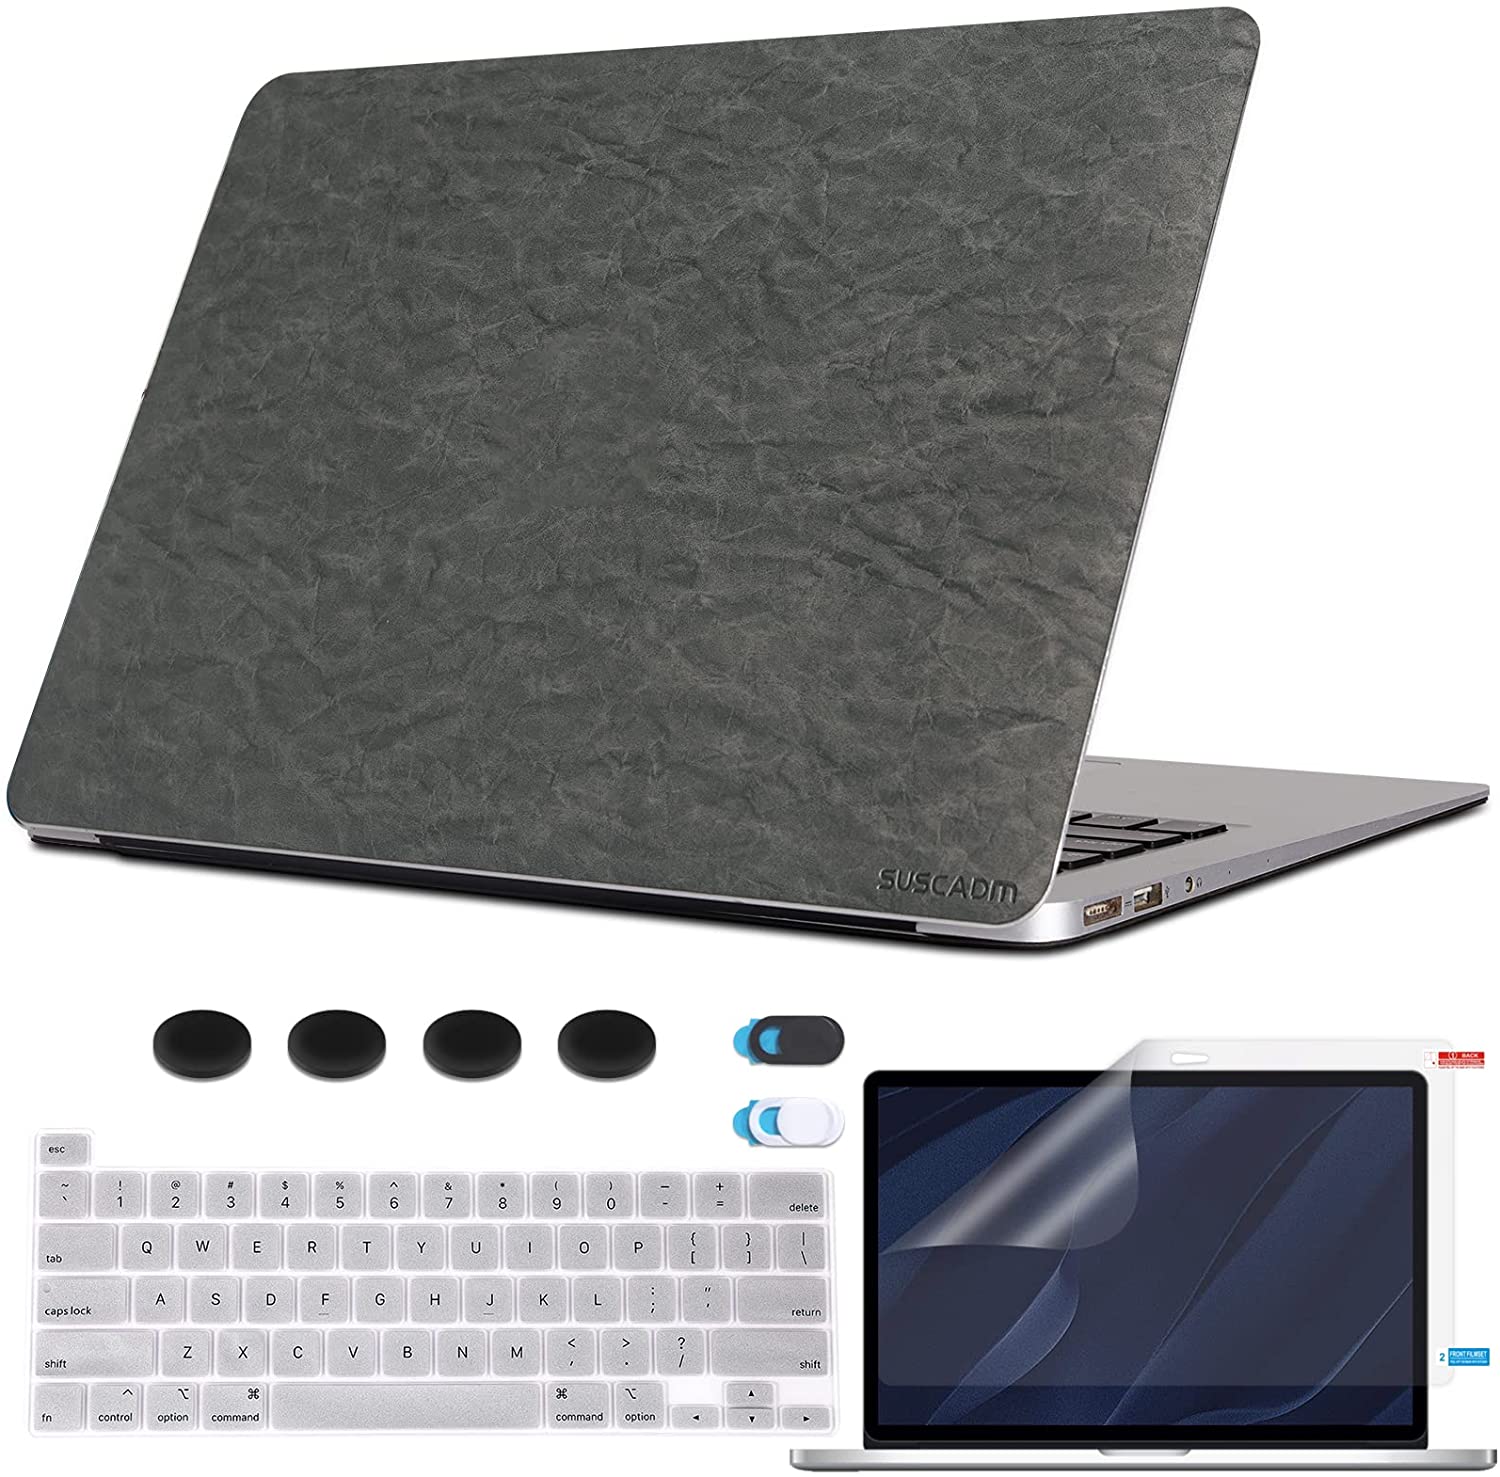 SUSCADM protective skin for 16-inch MacBook Pro Cyber Monday Deal